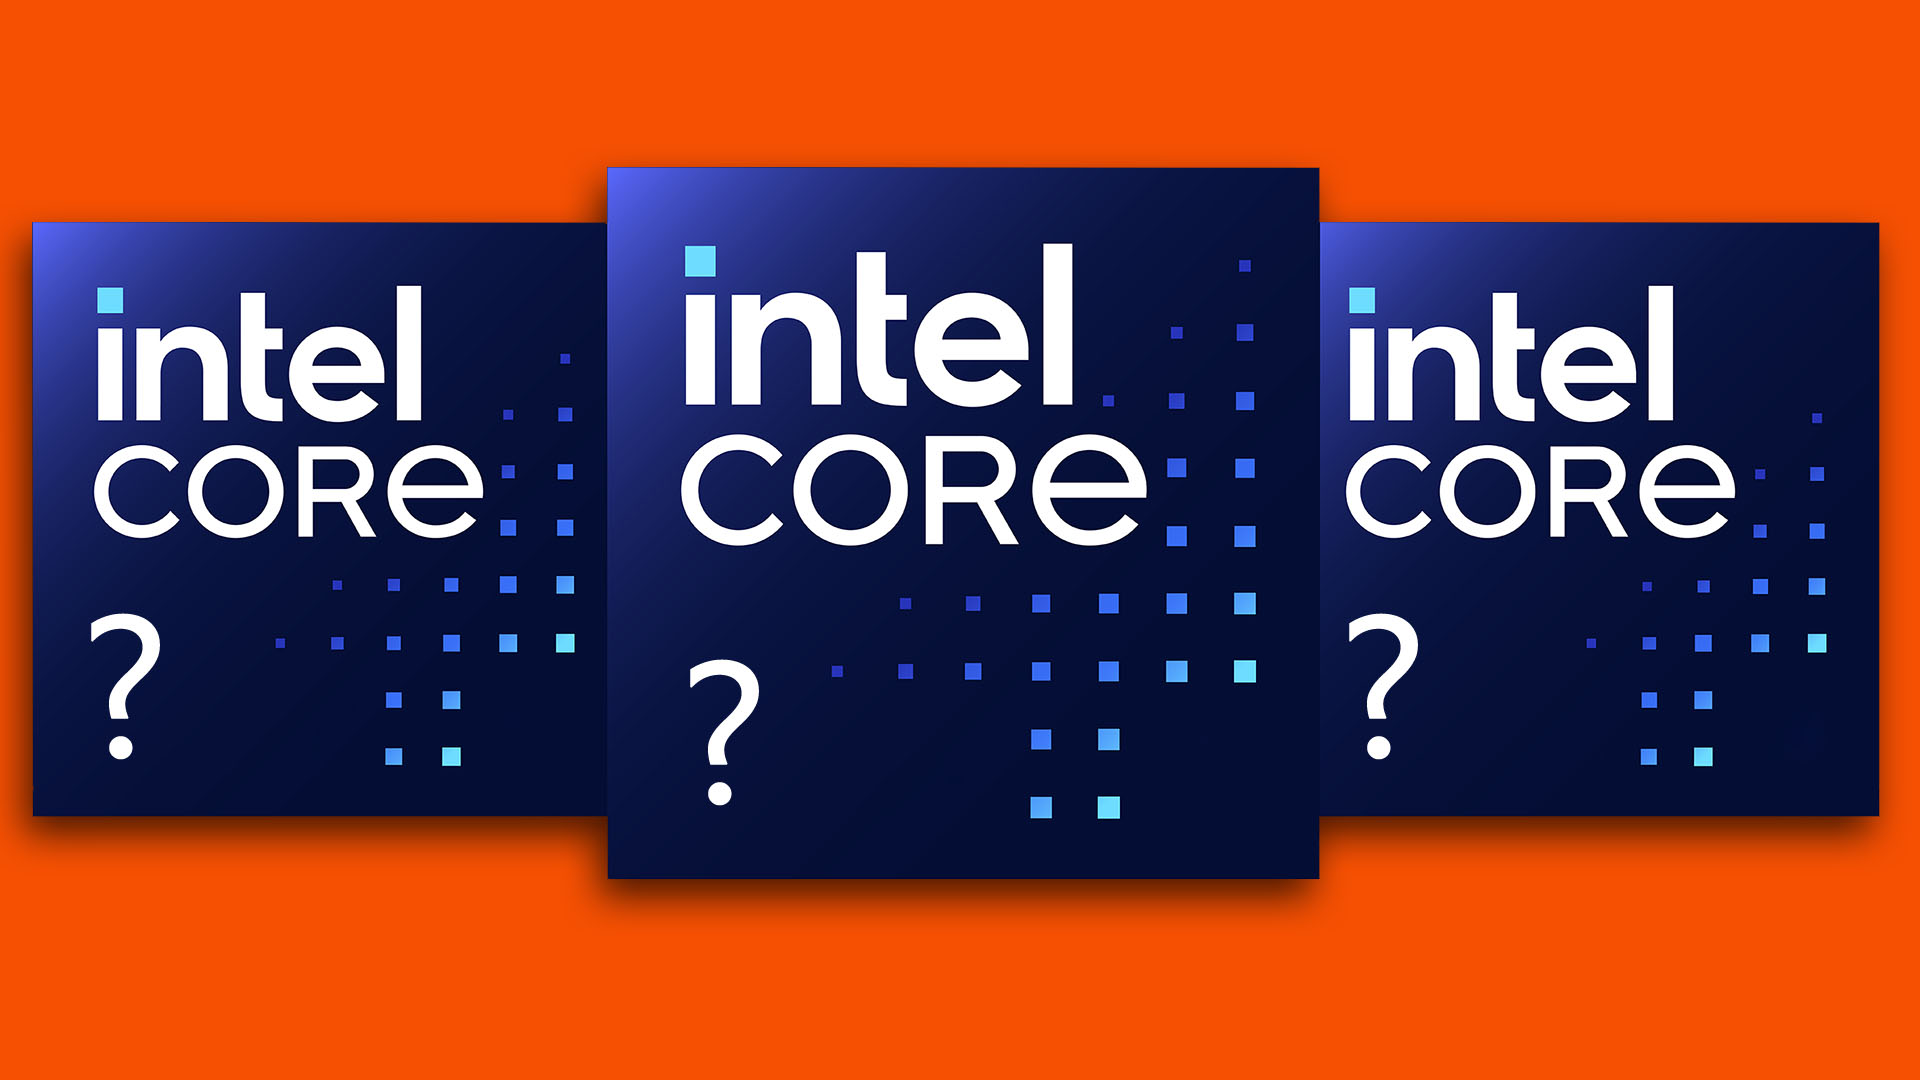 Intel's new gaming CPU range has a name, and it just leaked